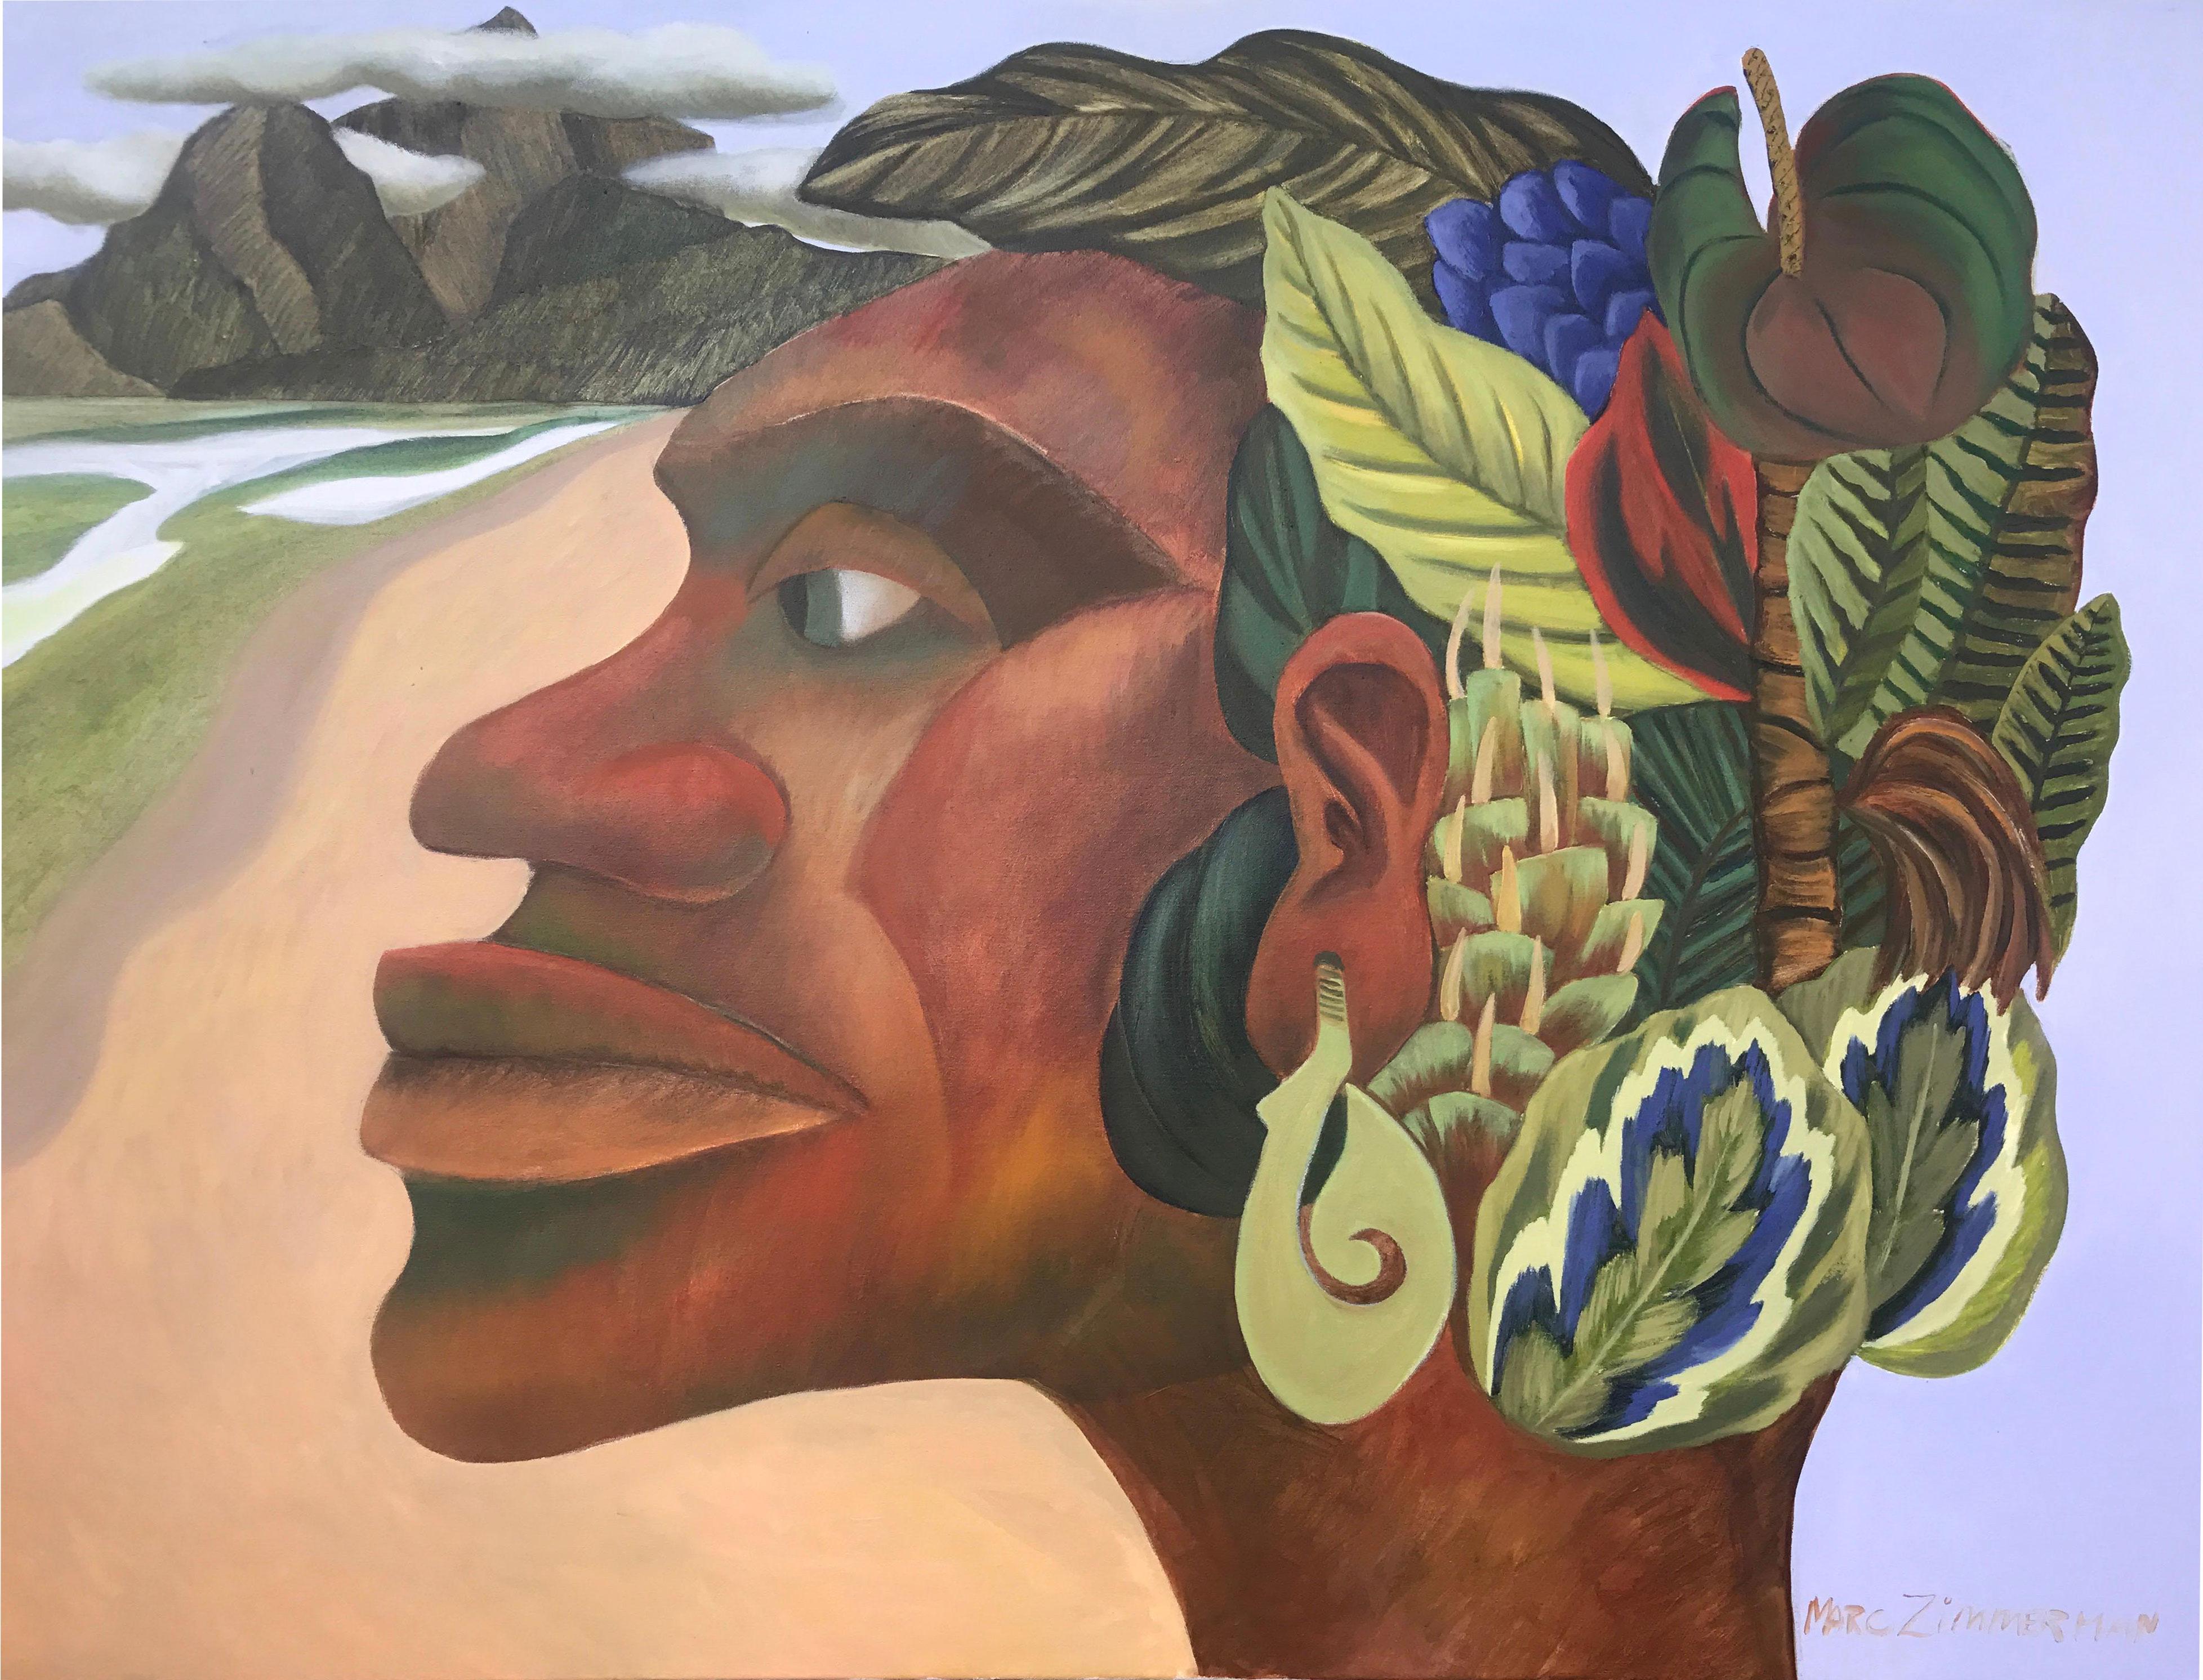 Portrait of a Polynesian poses with with a tropical headdress of exotic leaves. This painting has a female mate if you choose. they look fabulous together.

Native (male version) - Portrait Paintings - Conceptual Art By Marc Zimmerman

This